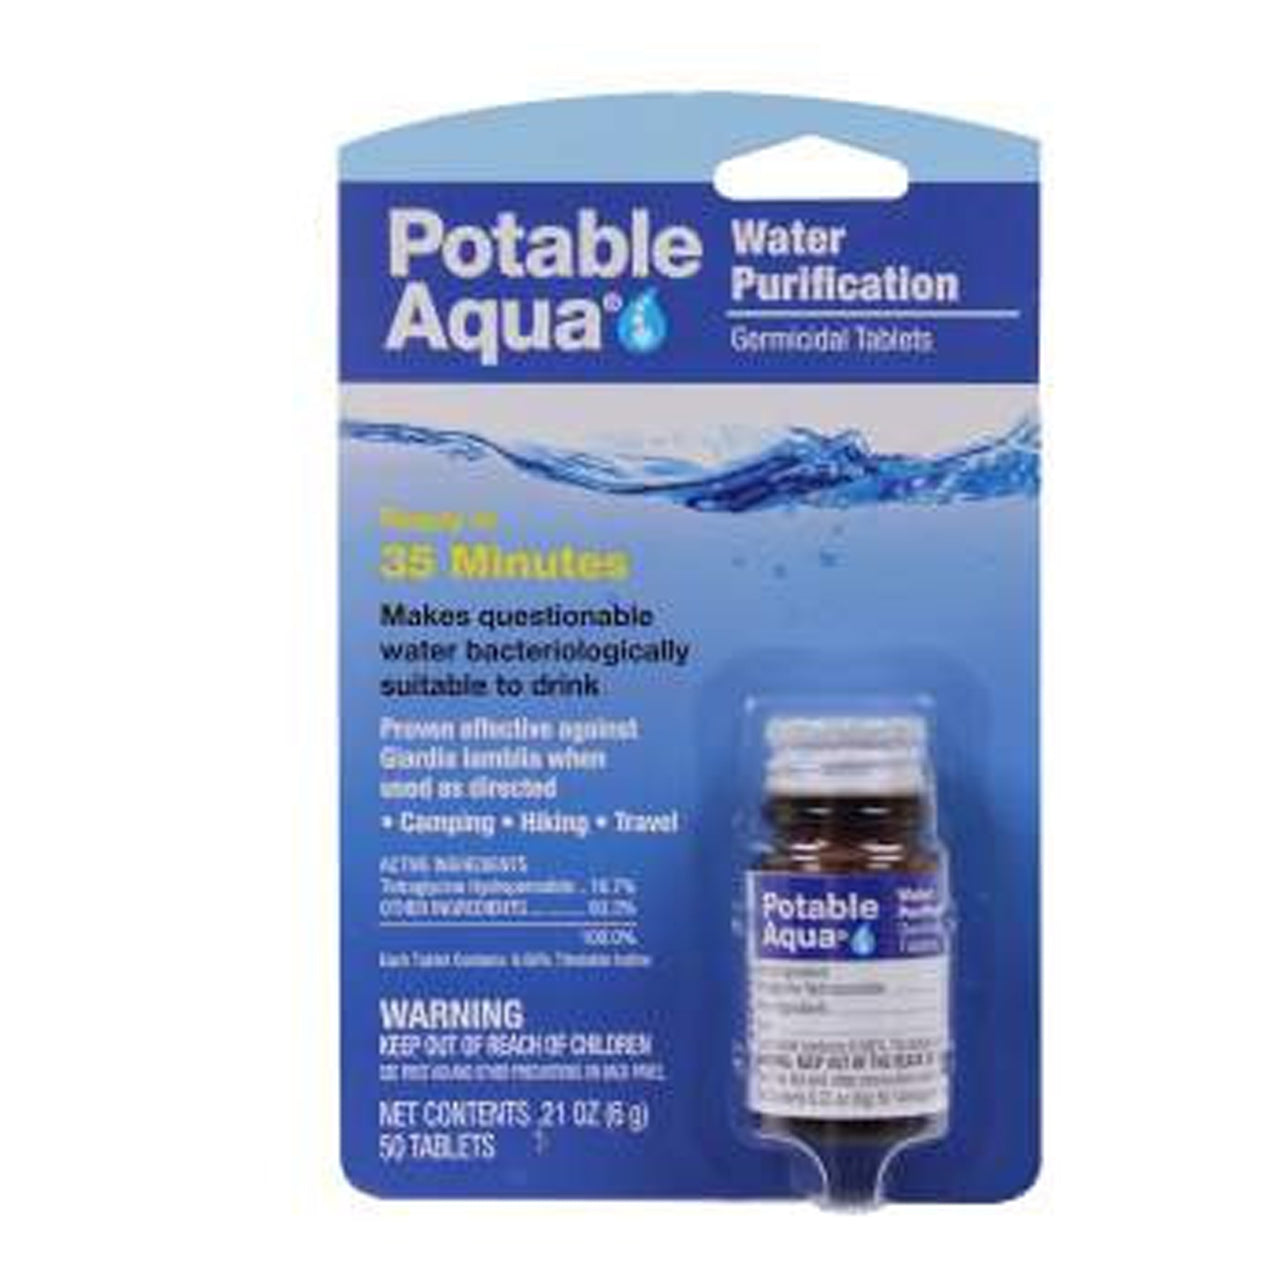 A must for ANY emergency situation. Great for campers and preppers and can easily fit inside your Bug Out Bag, the Potable Aqua Water Purification Tablets make questionable water bacteriologically safe.